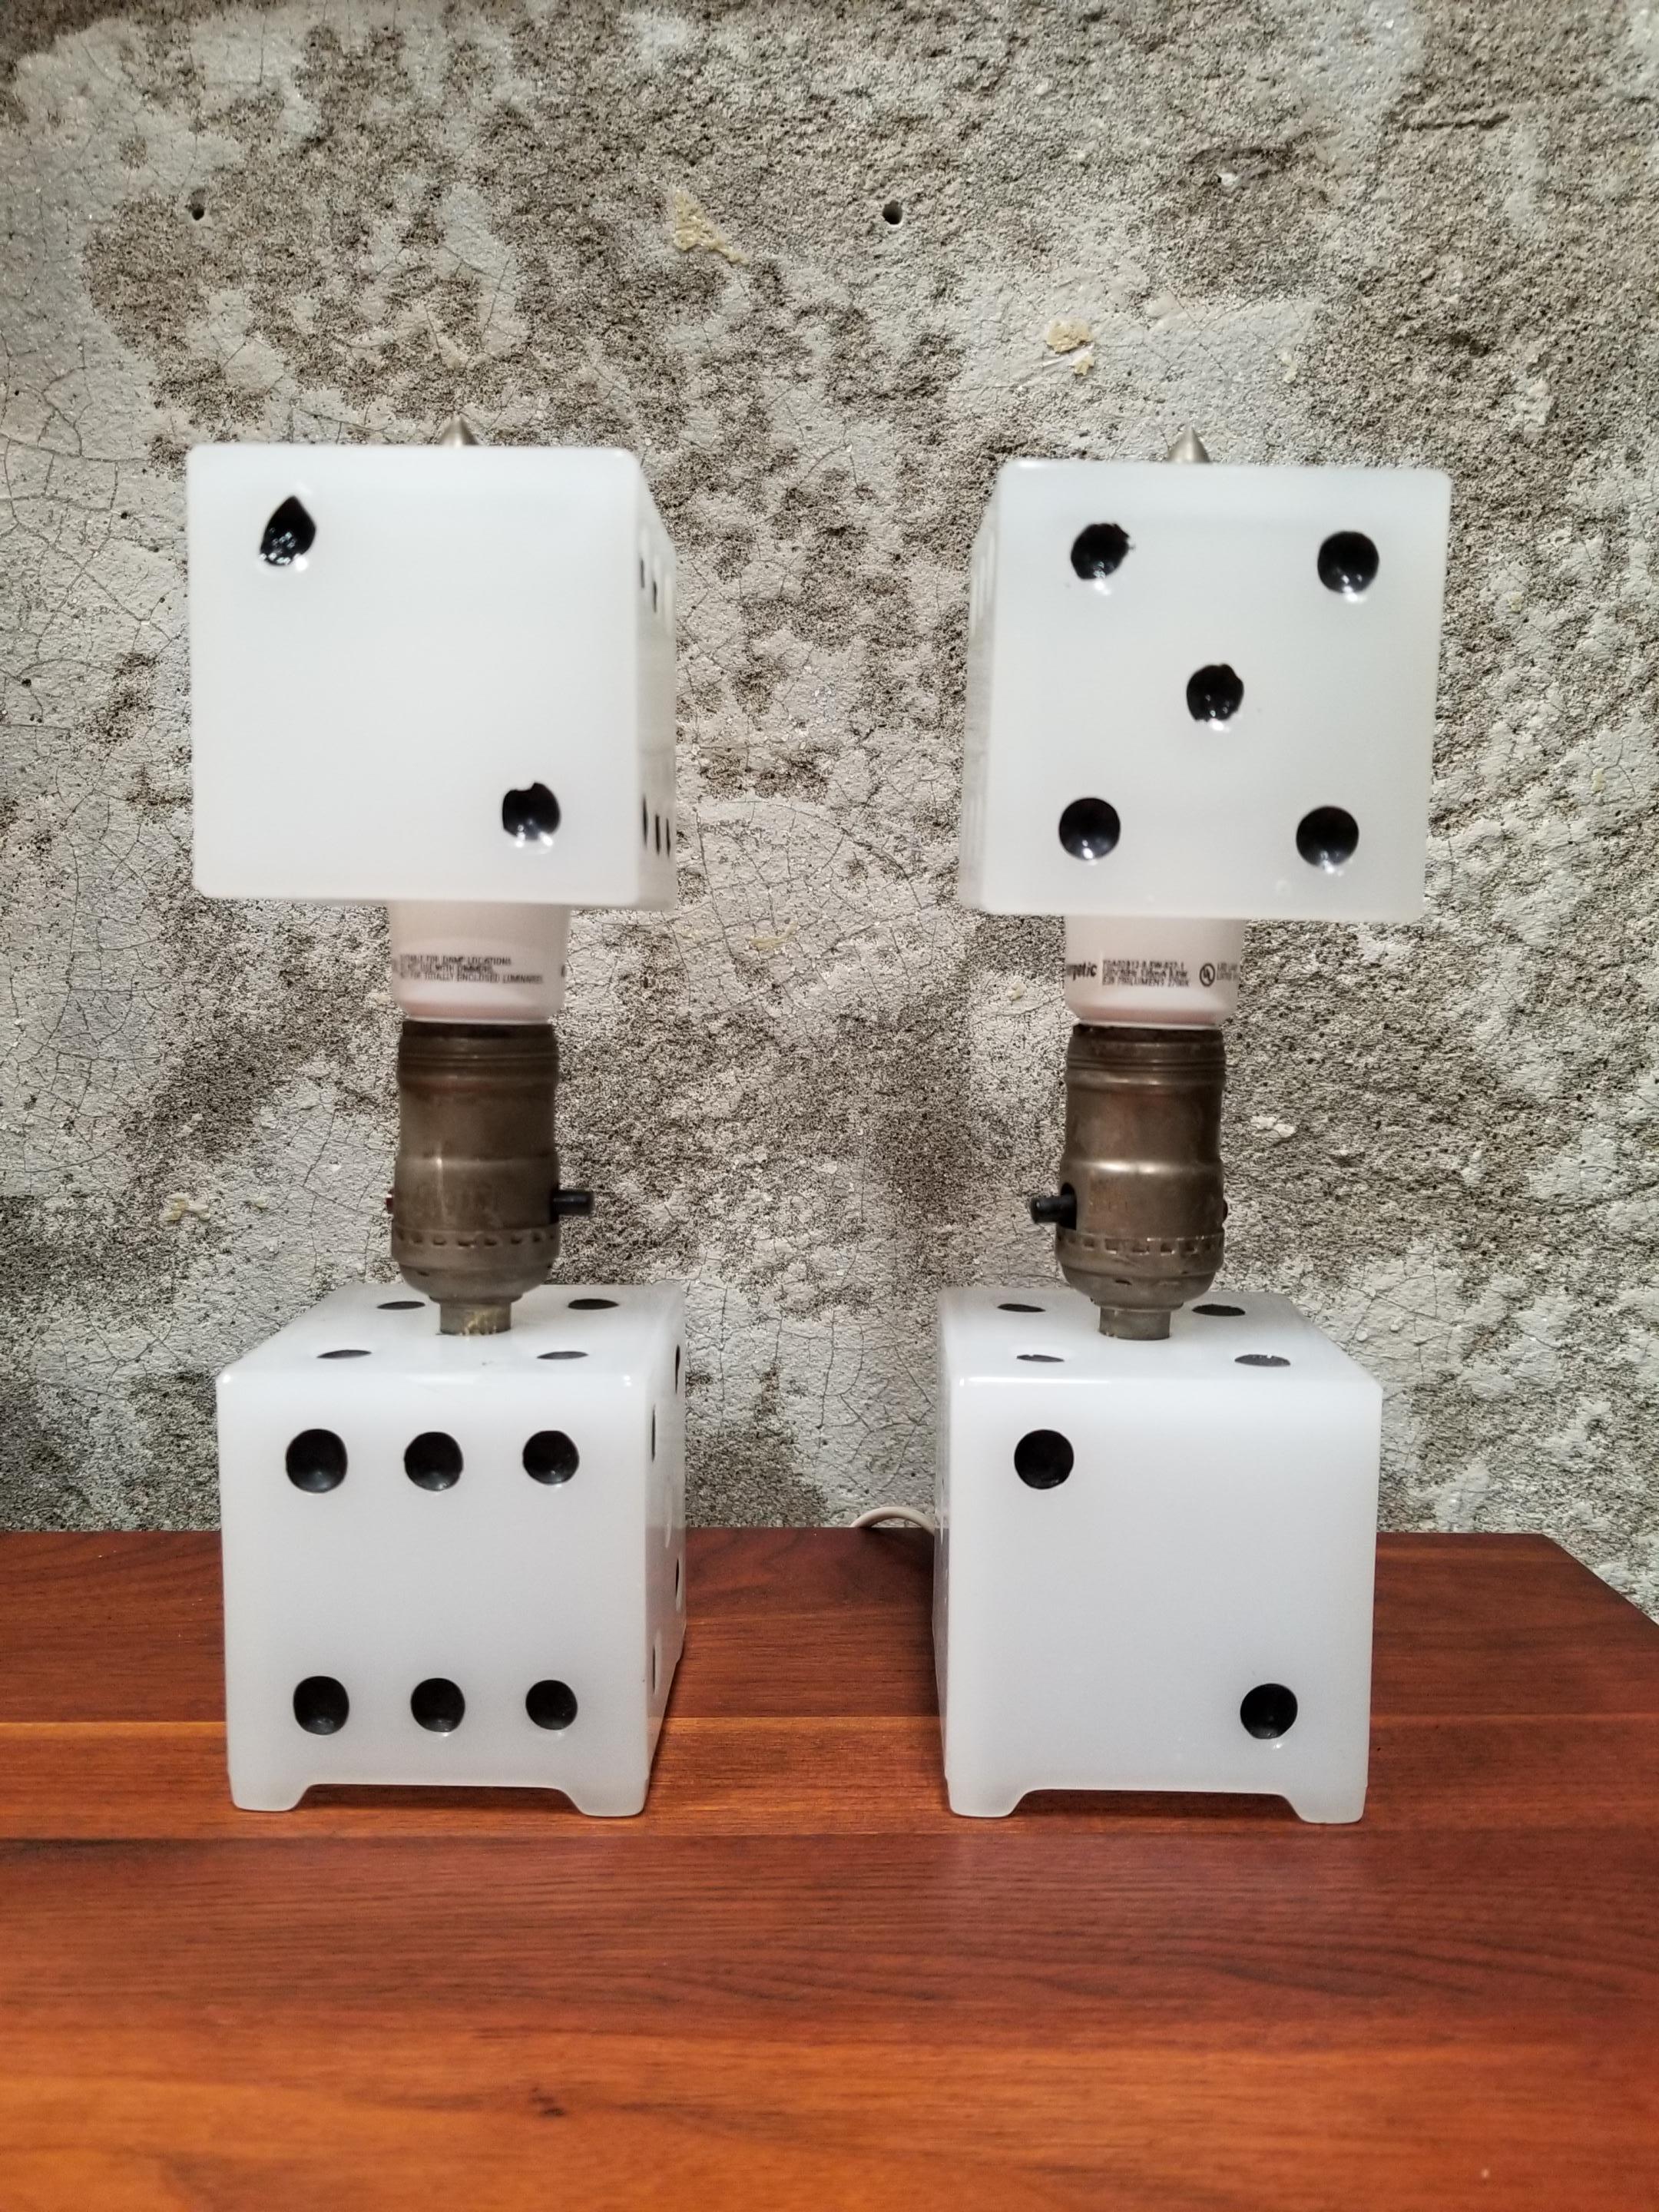 A whimsical pair table lamps made of milk glass with painted numbers. Original nickel-plated light sockets. Might be especially enjoyed by gamblers, board game players or as a fun, unusual source of light for a den or kids play room.